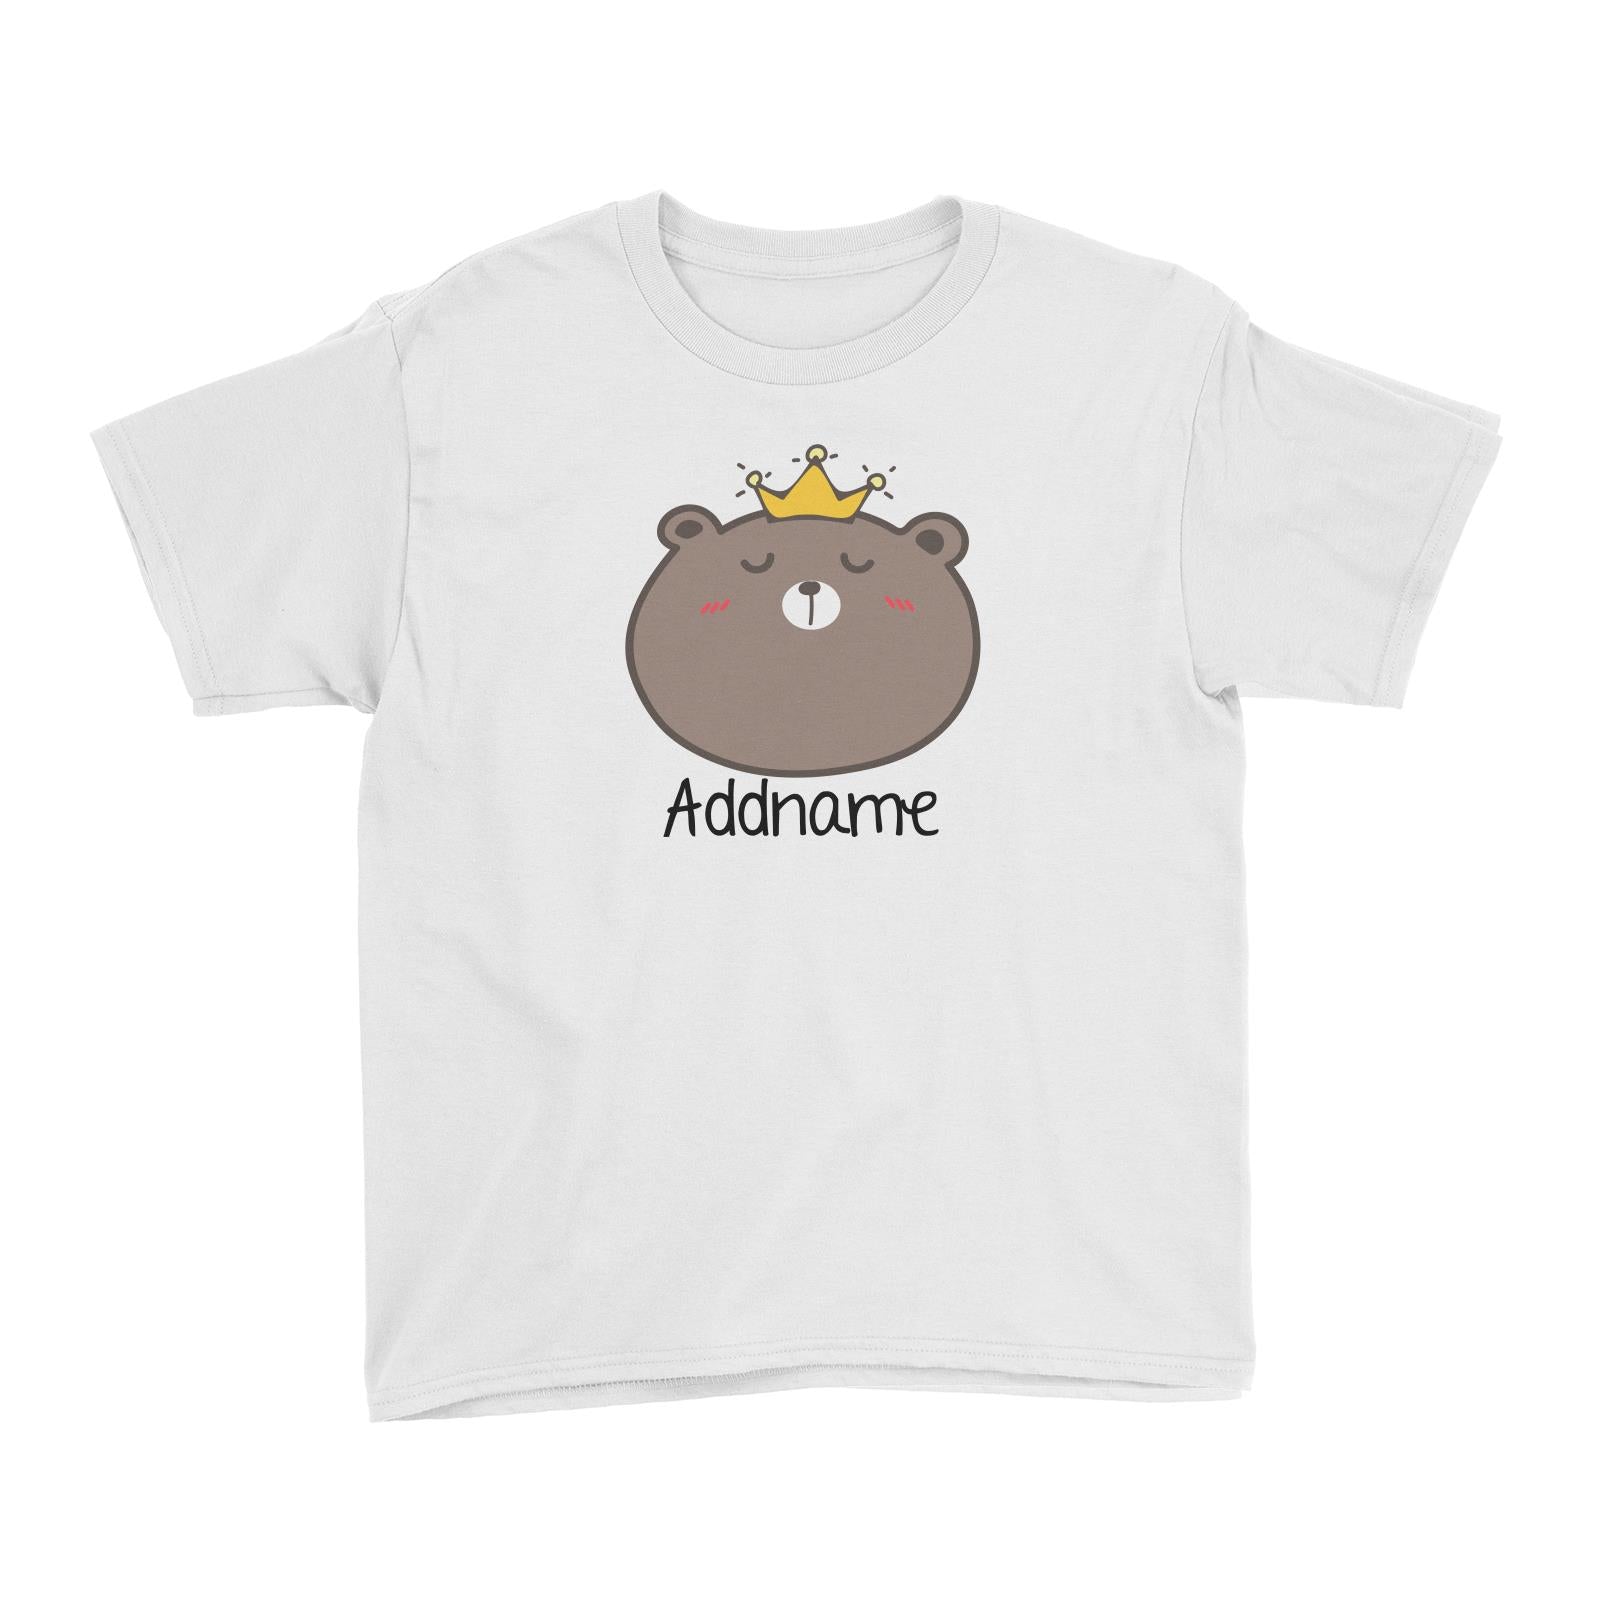 Cute Animals And Friends Series Cute Brown Bear With Crown Addname Kid's T-Shirt